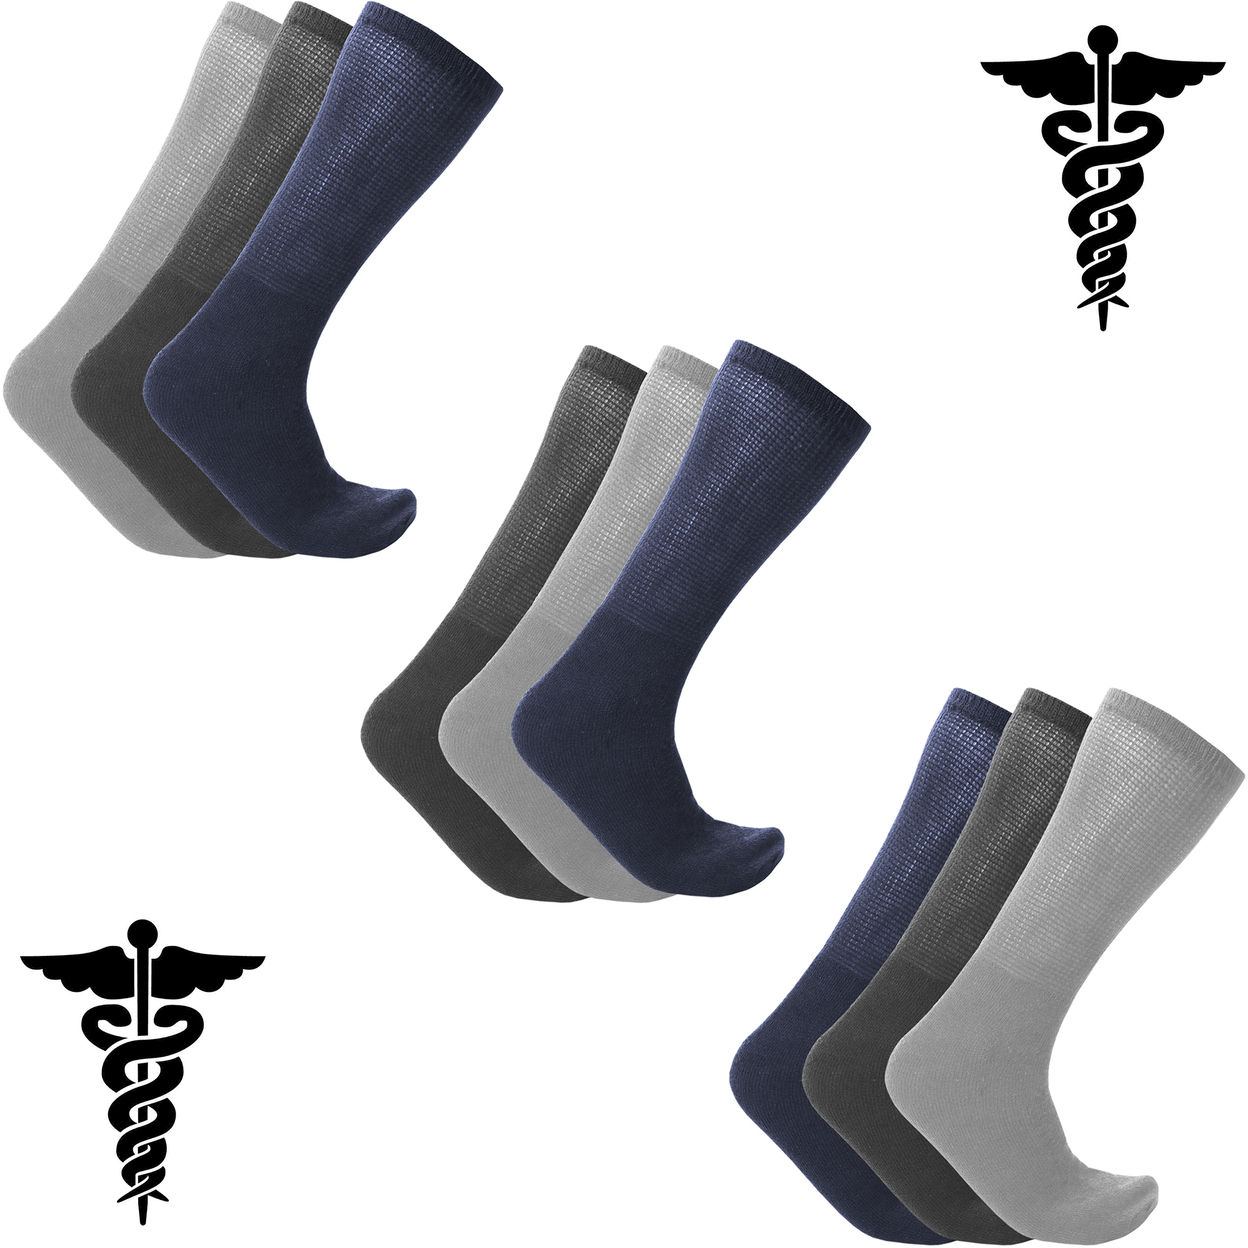 Multi-Pairs: Physician Approved Non-Binding Neuropathy Diabetic Crew Circulatory Socks - 12-Pairs, Assorted